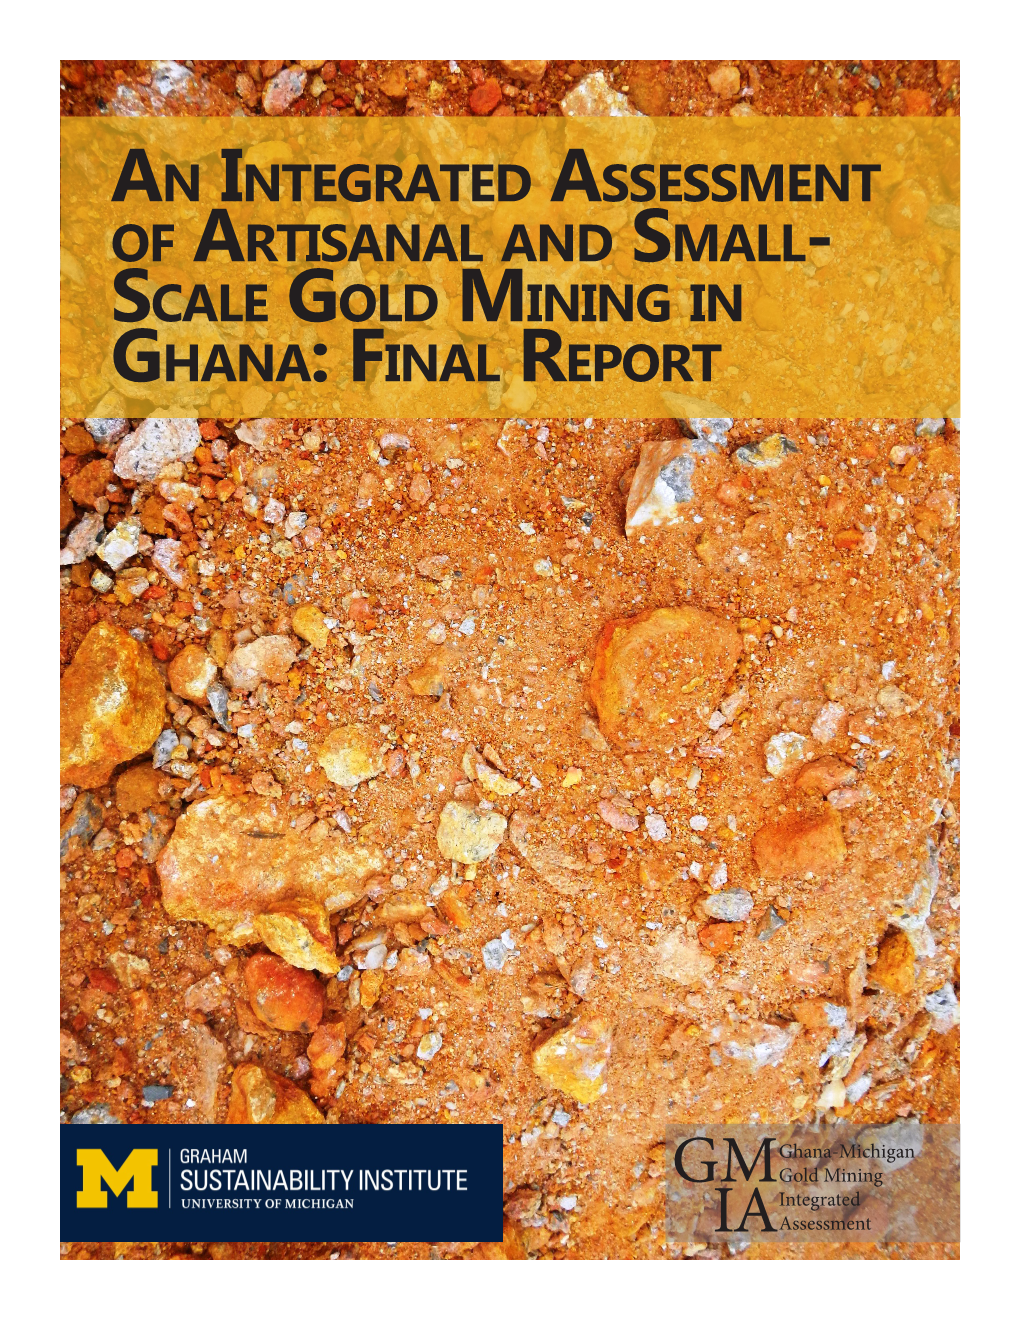 Scale Gold Mining in Ghana: Final Report